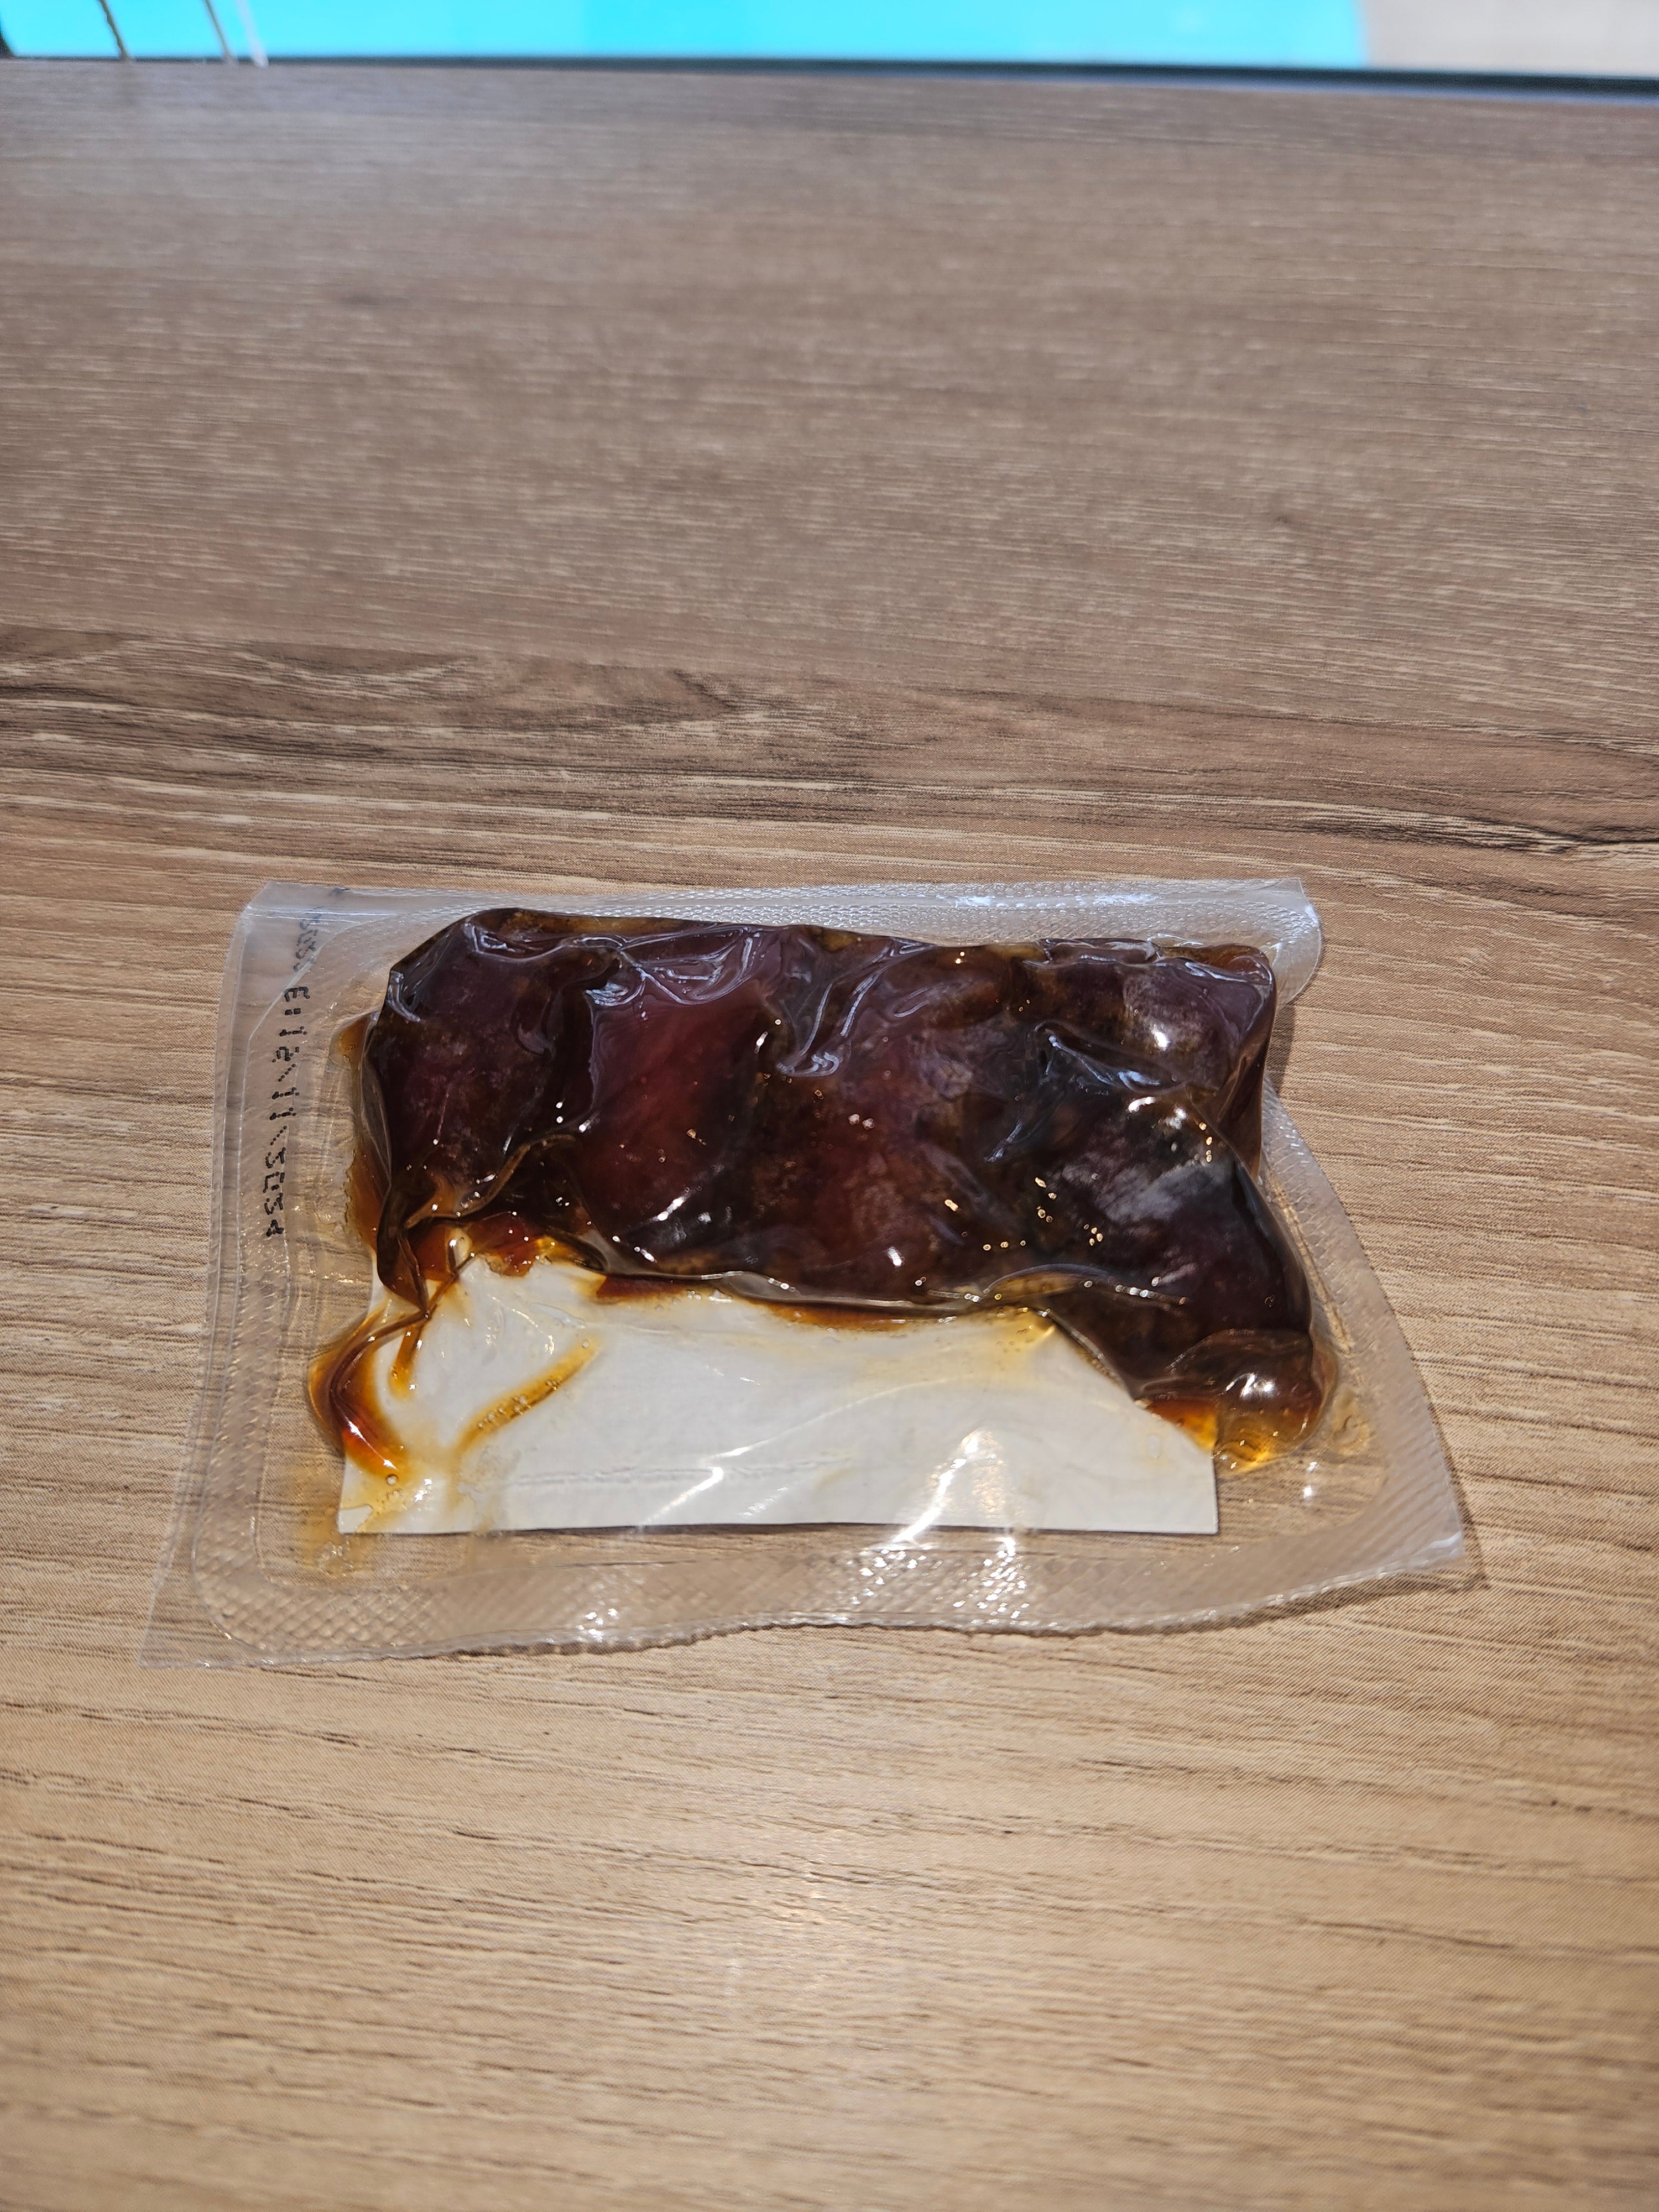 Pack of 5 Dates (Vacuum Packed)